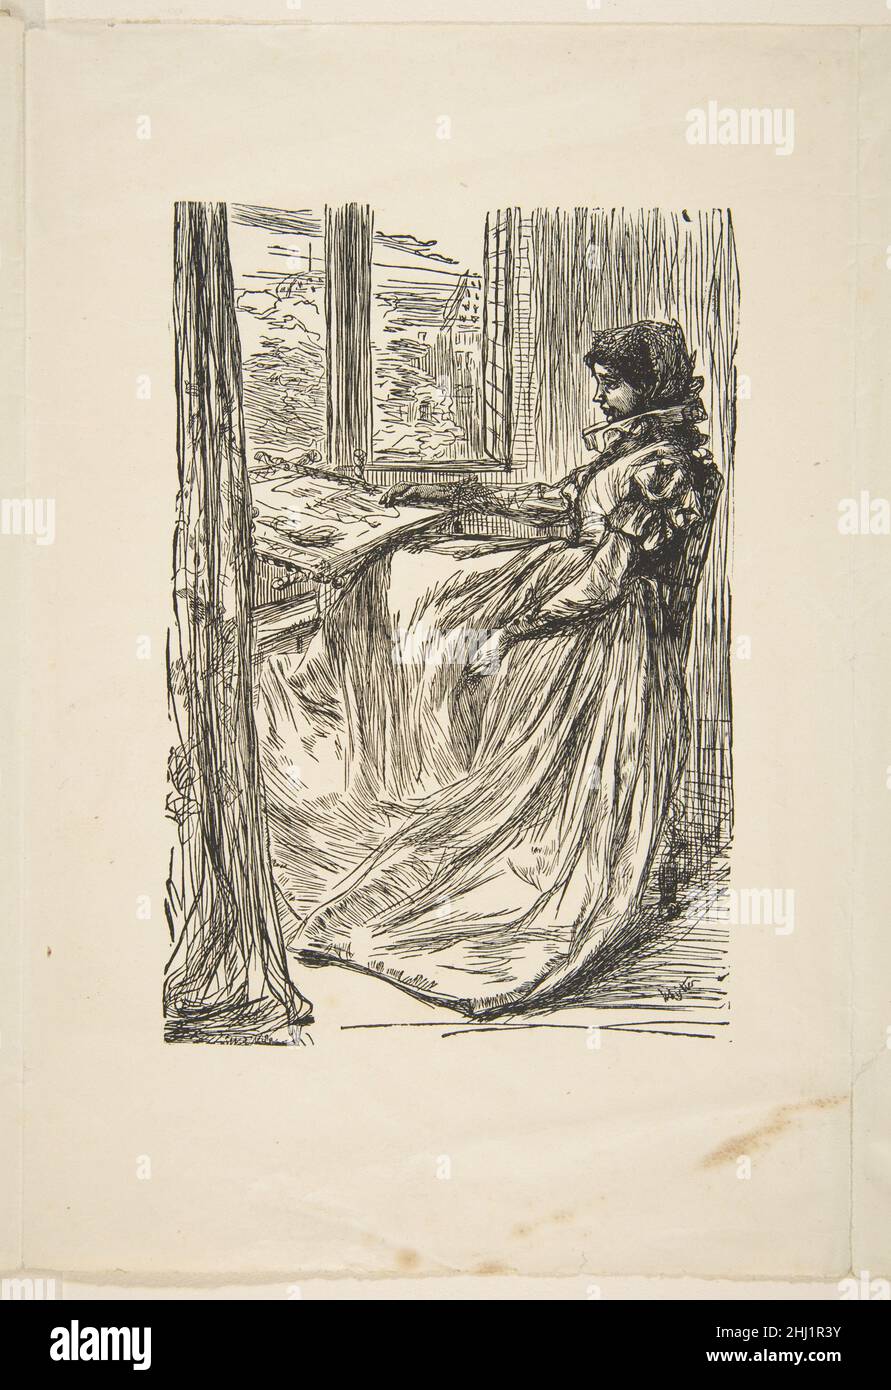 The Morning Before the Massacre of St. Bartholomew (for 'Once a Week,' August 16, 1862) 1862 After James McNeill Whistler American In 1862 Whistler designed four wood engravings for the London periodical 'Once a Week.' Many of his Pre-Raphaelite friends were illustrating poems and short stories at this moment and the decade proved to be the start of a new flowering of British illustration. Founded in 1859, 'Once a Week' supported the movement and was known as a 'journal of the younger men.' Whister's image responds to a poem by George Walter Thornbury that evokes the persecution of Protestants Stock Photo